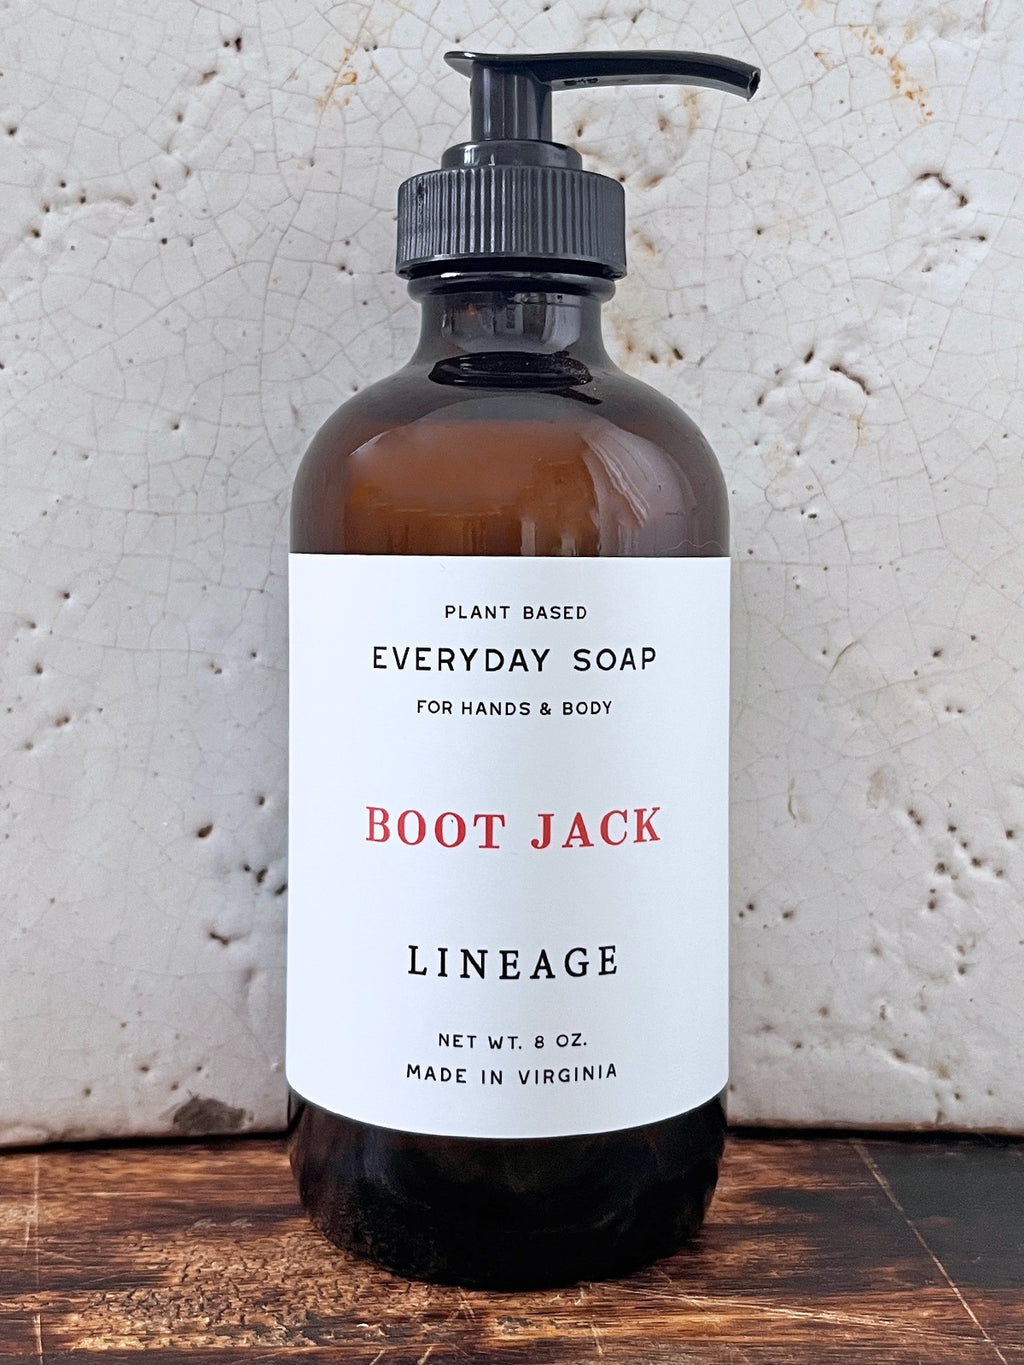 LINEAGE - Boot Jack Hand and Body Soap